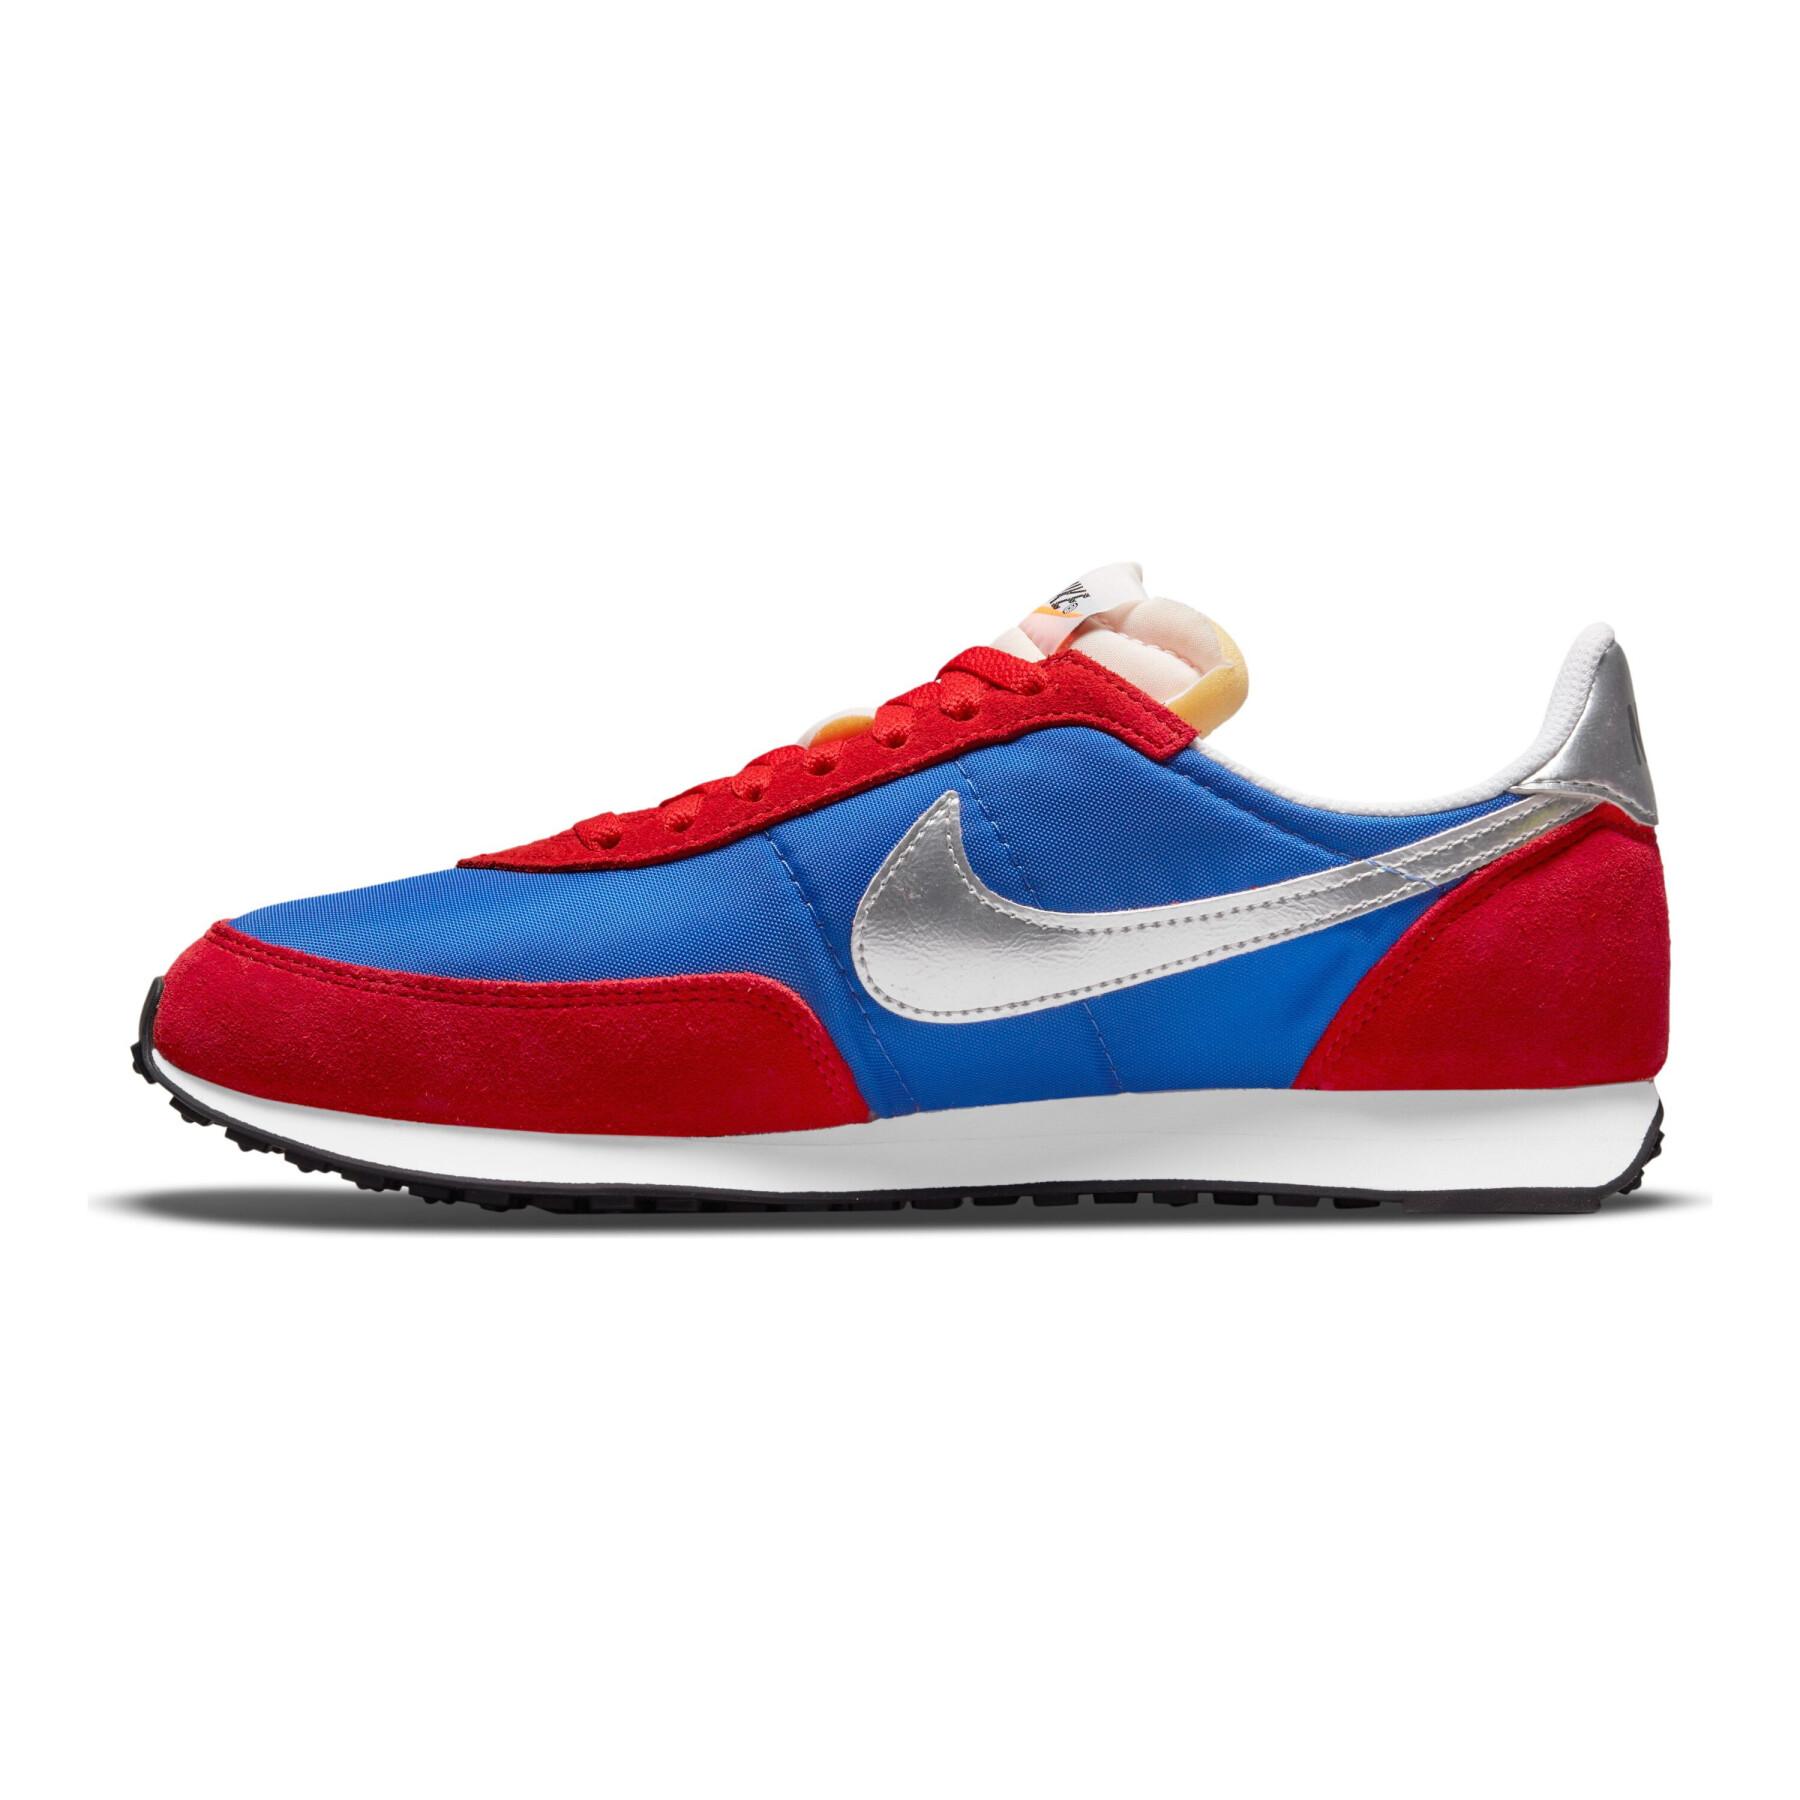 Trainers Nike Waffle Trainer 2 Sp